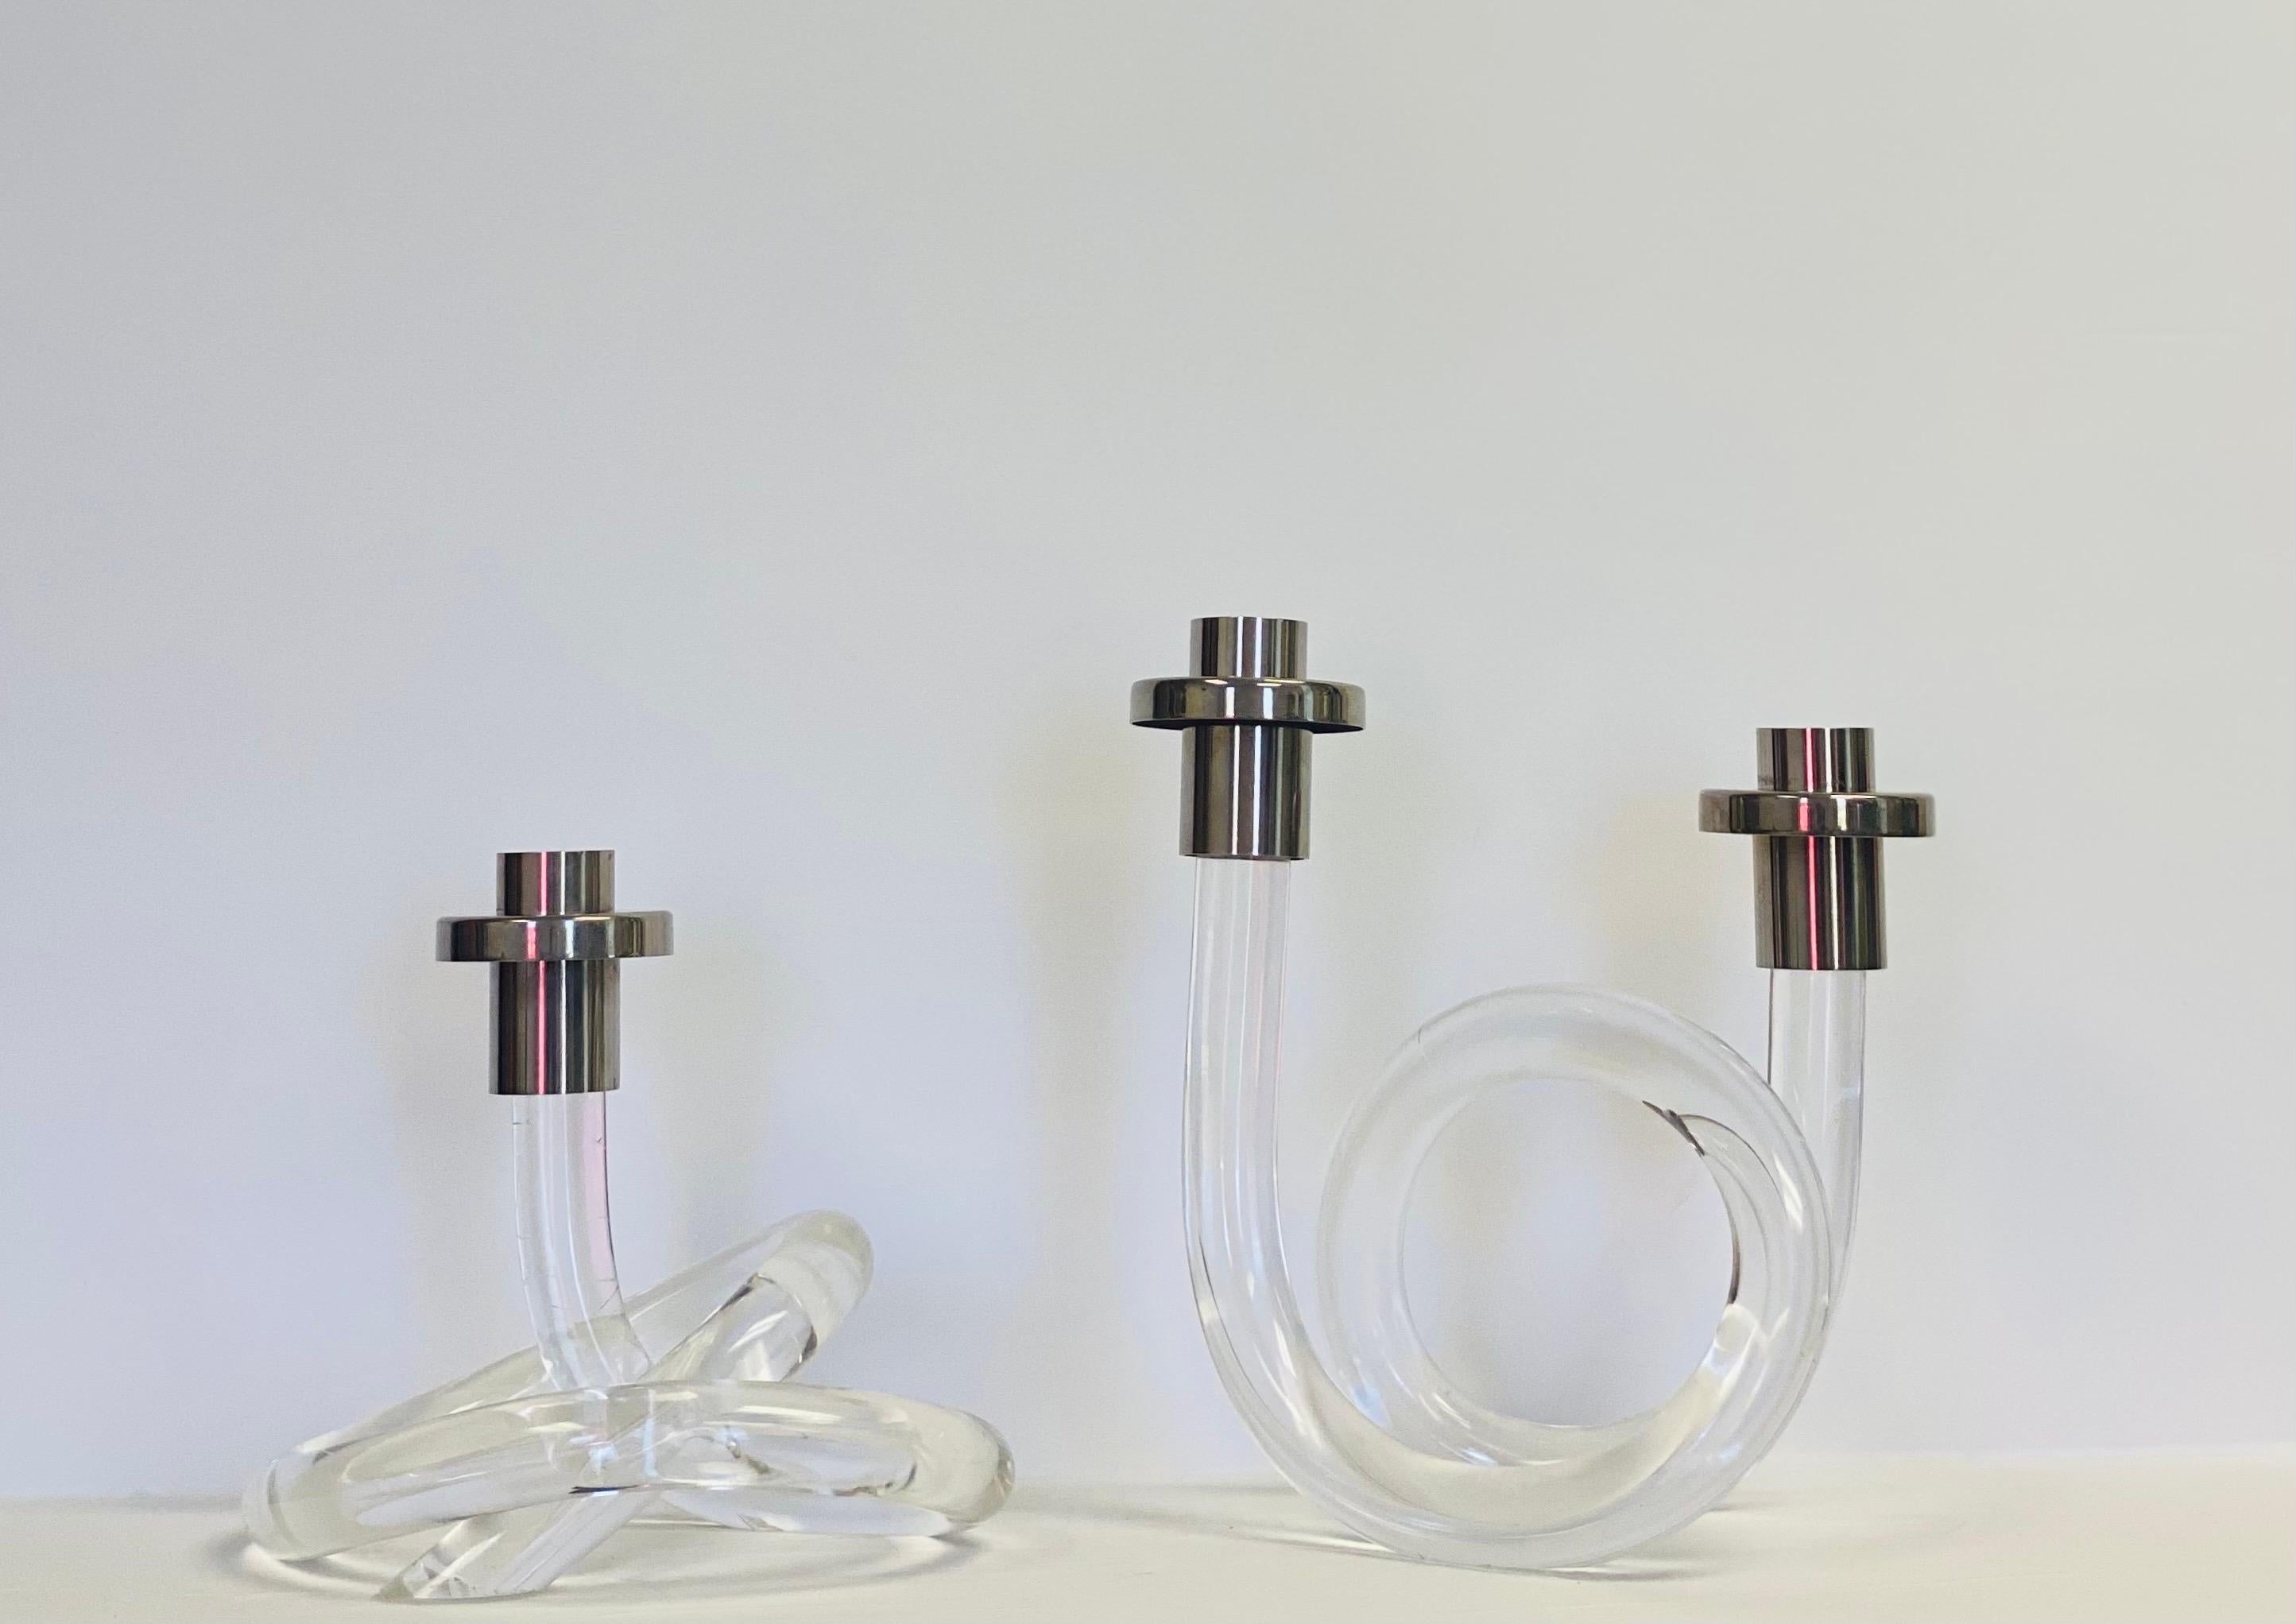 We are very pleased to offer a modern pair of candlesticks by Dorothy Thorpe, circa the 1970s. These eye-catching sculptural candlesticks are crafted from beautiful Lucite and twisted for a structural display piece that is sure to make a statement.